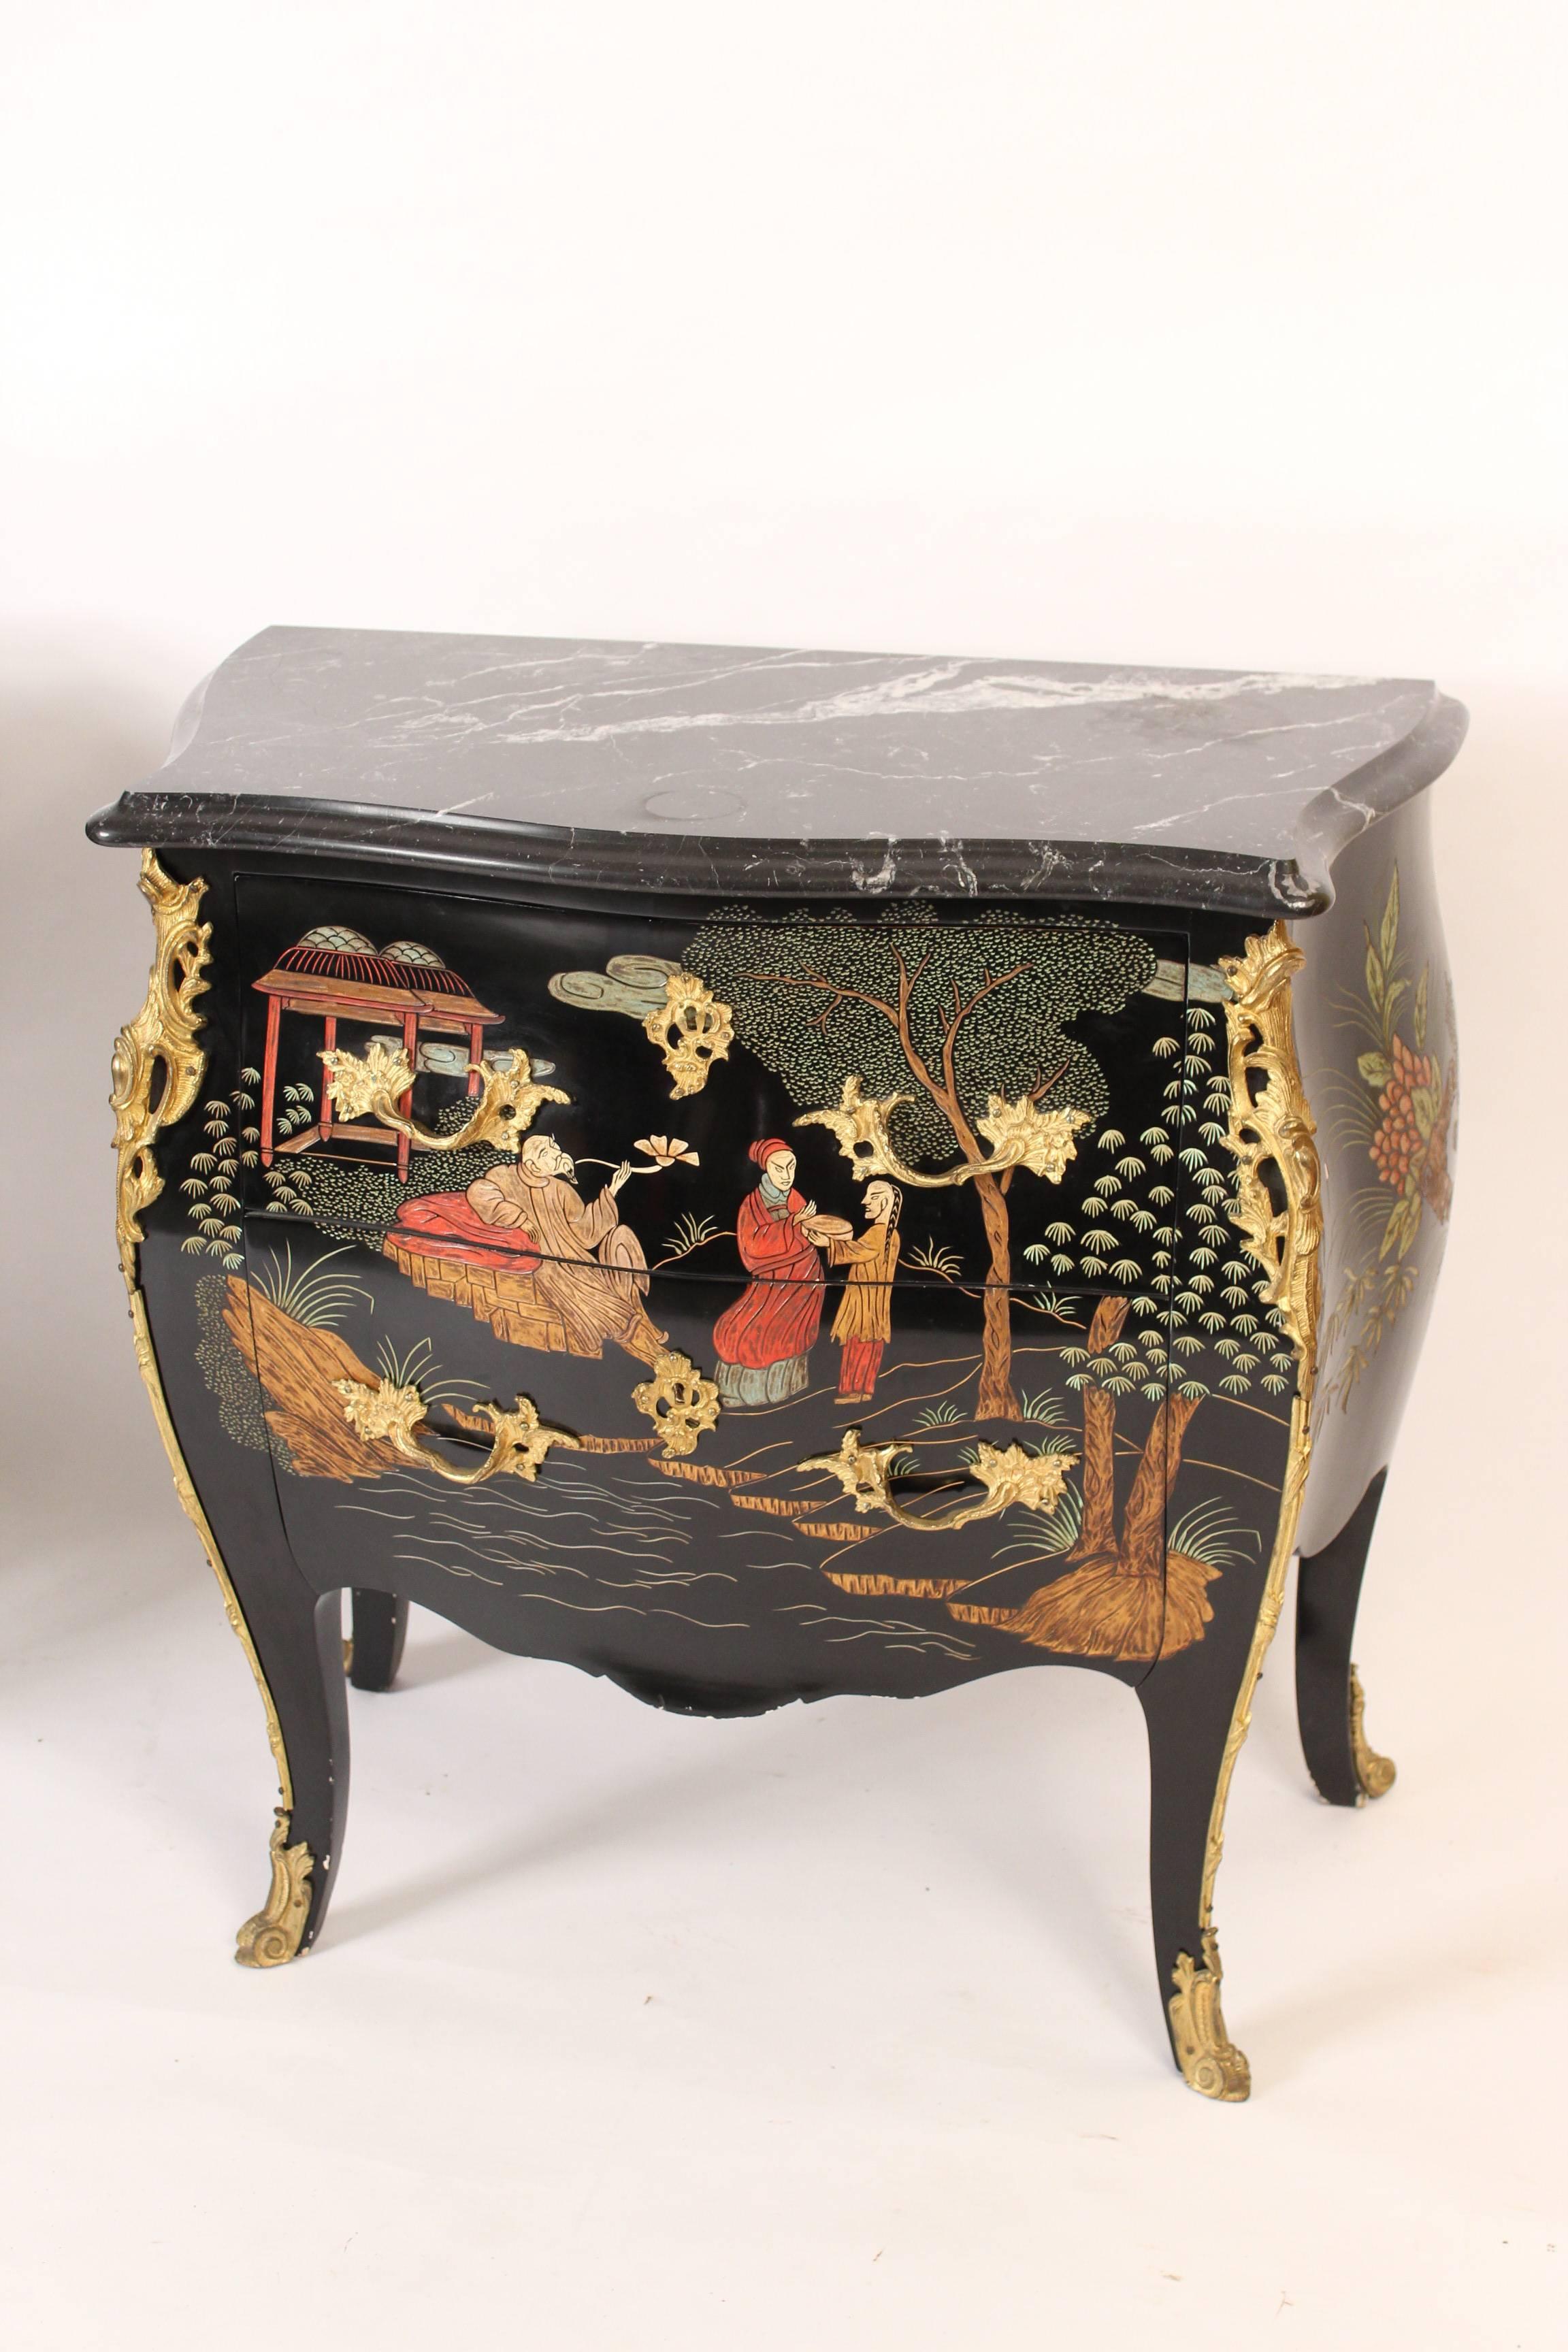 Pair of Louis XV style Coromandel lacquer bombe commodes with, gilt bronze mounts and marble tops, circa 1990. Exquisite colorful pair of commodes with top quality craftsmanship, fine quality gilt bronze mounts, colorful Coromandel lacquer